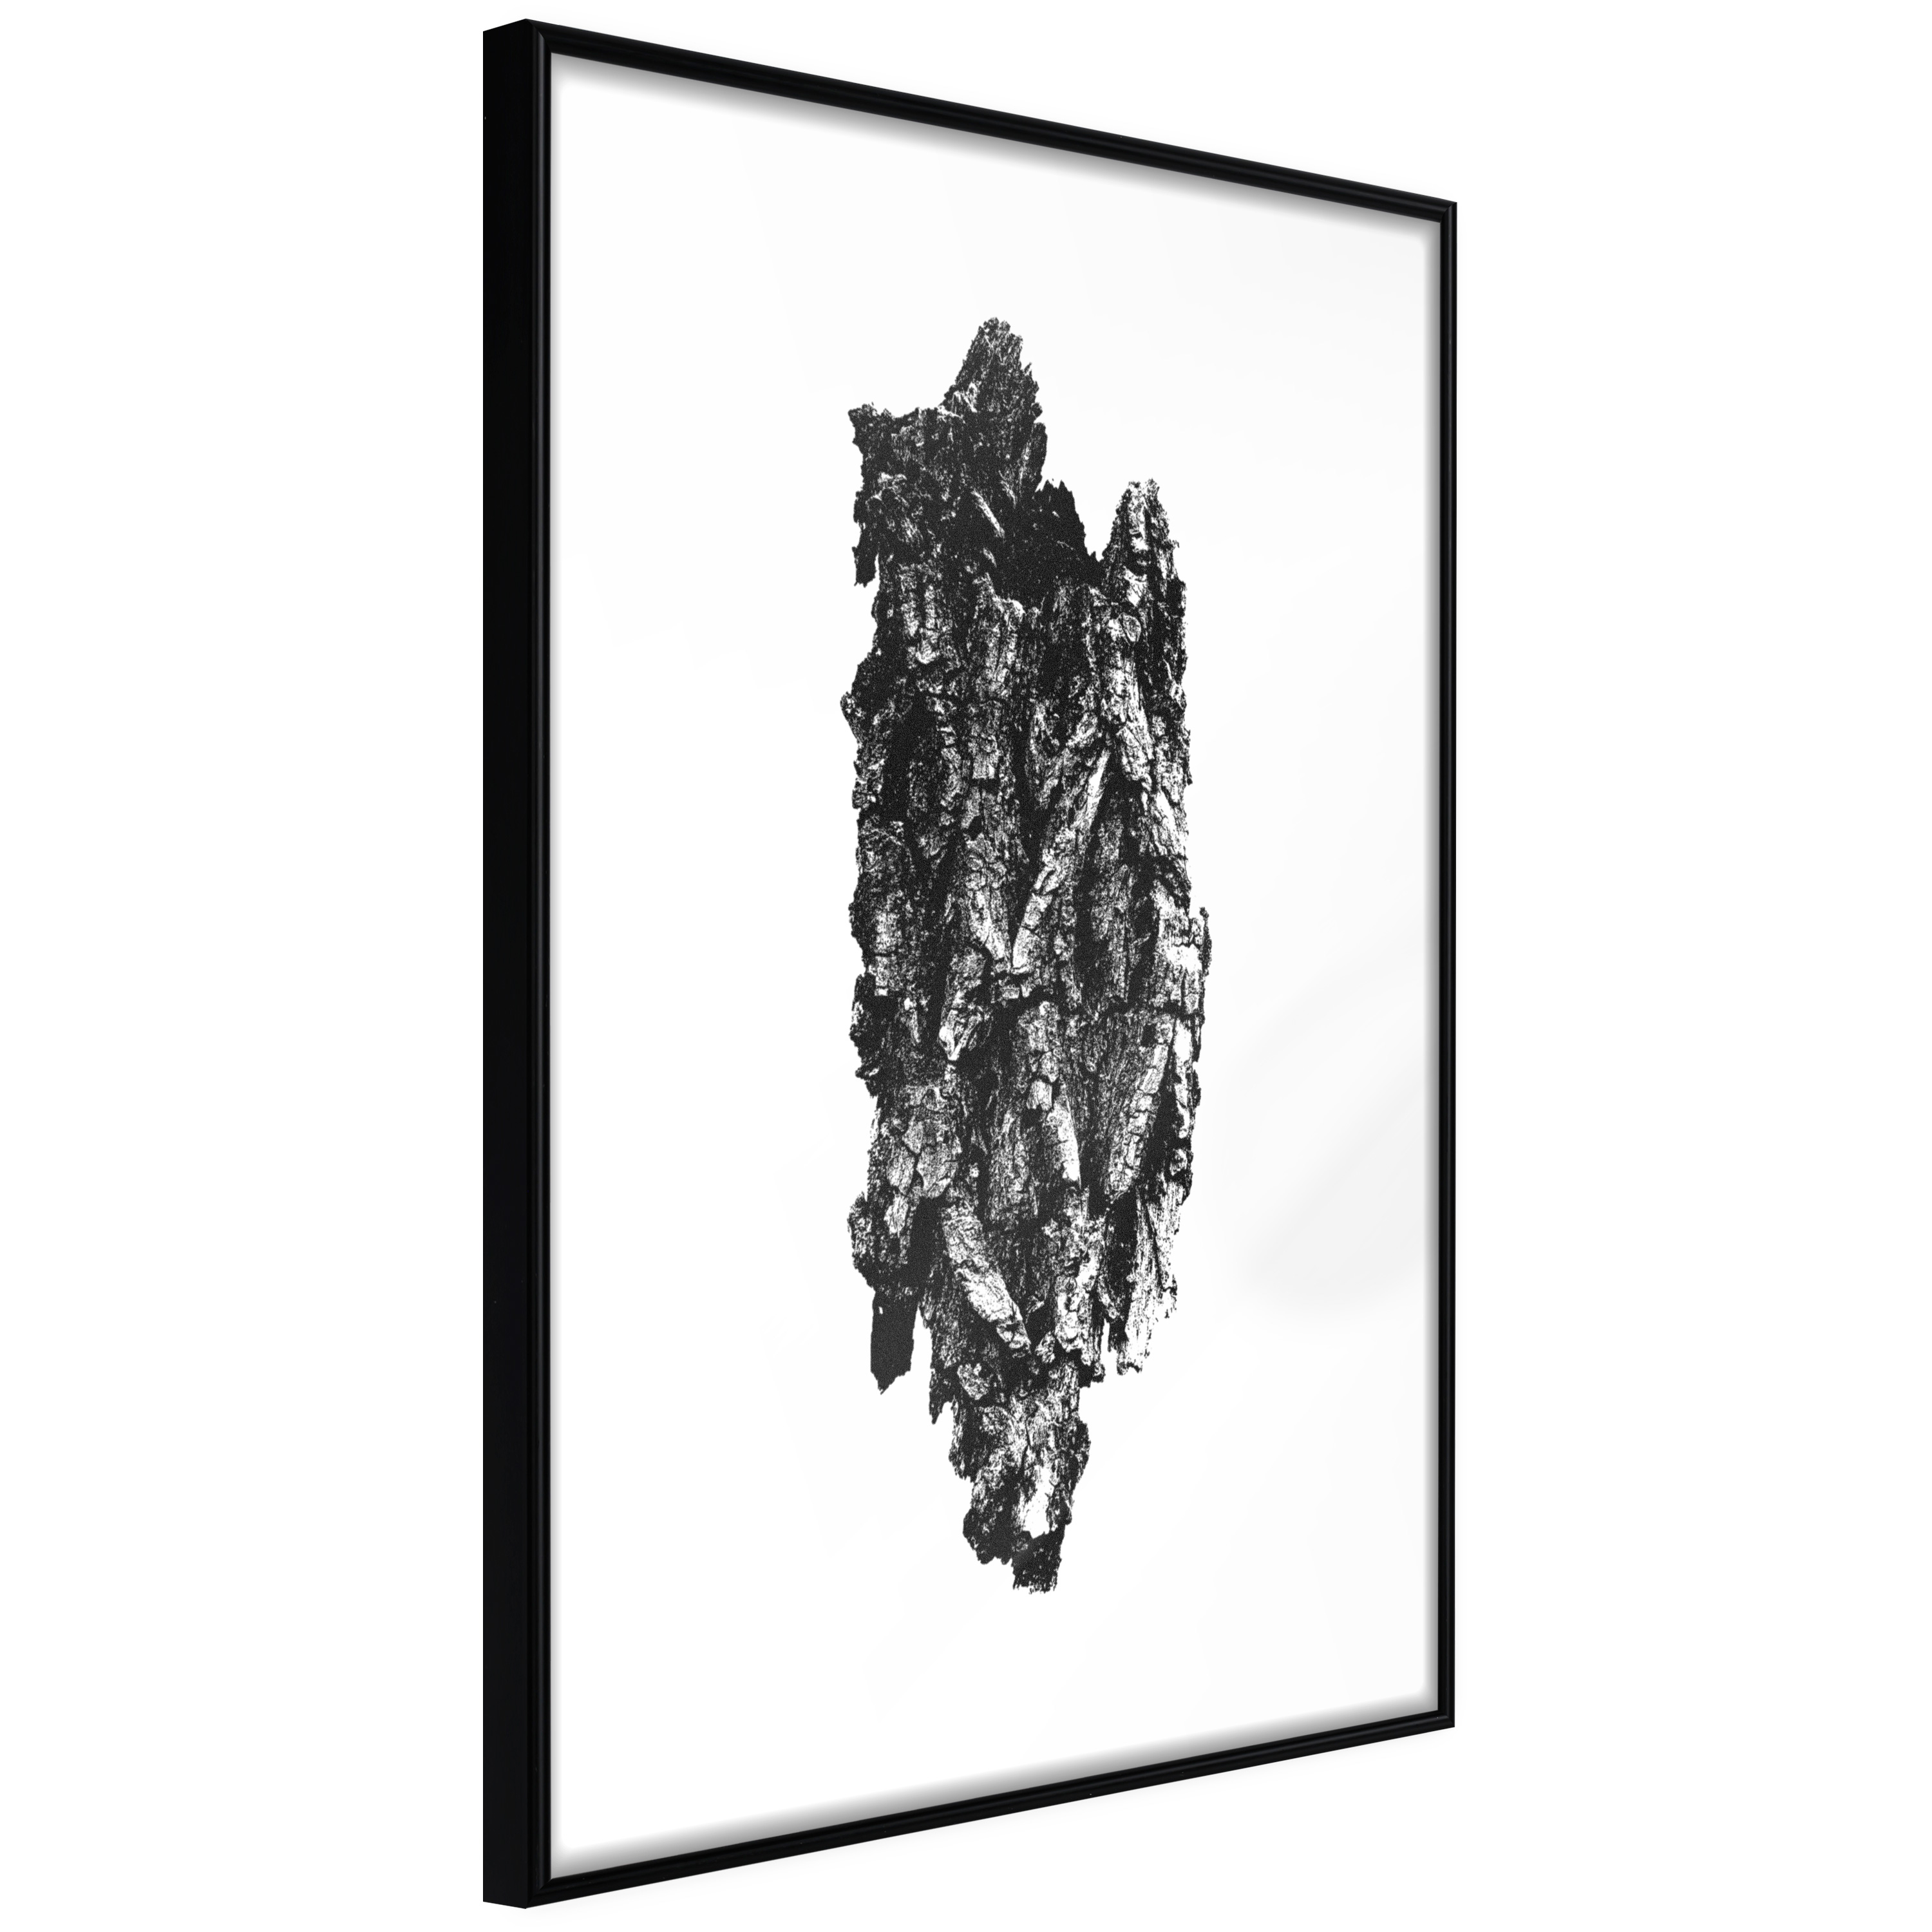 Poster - Texture of a Tree - 20x30